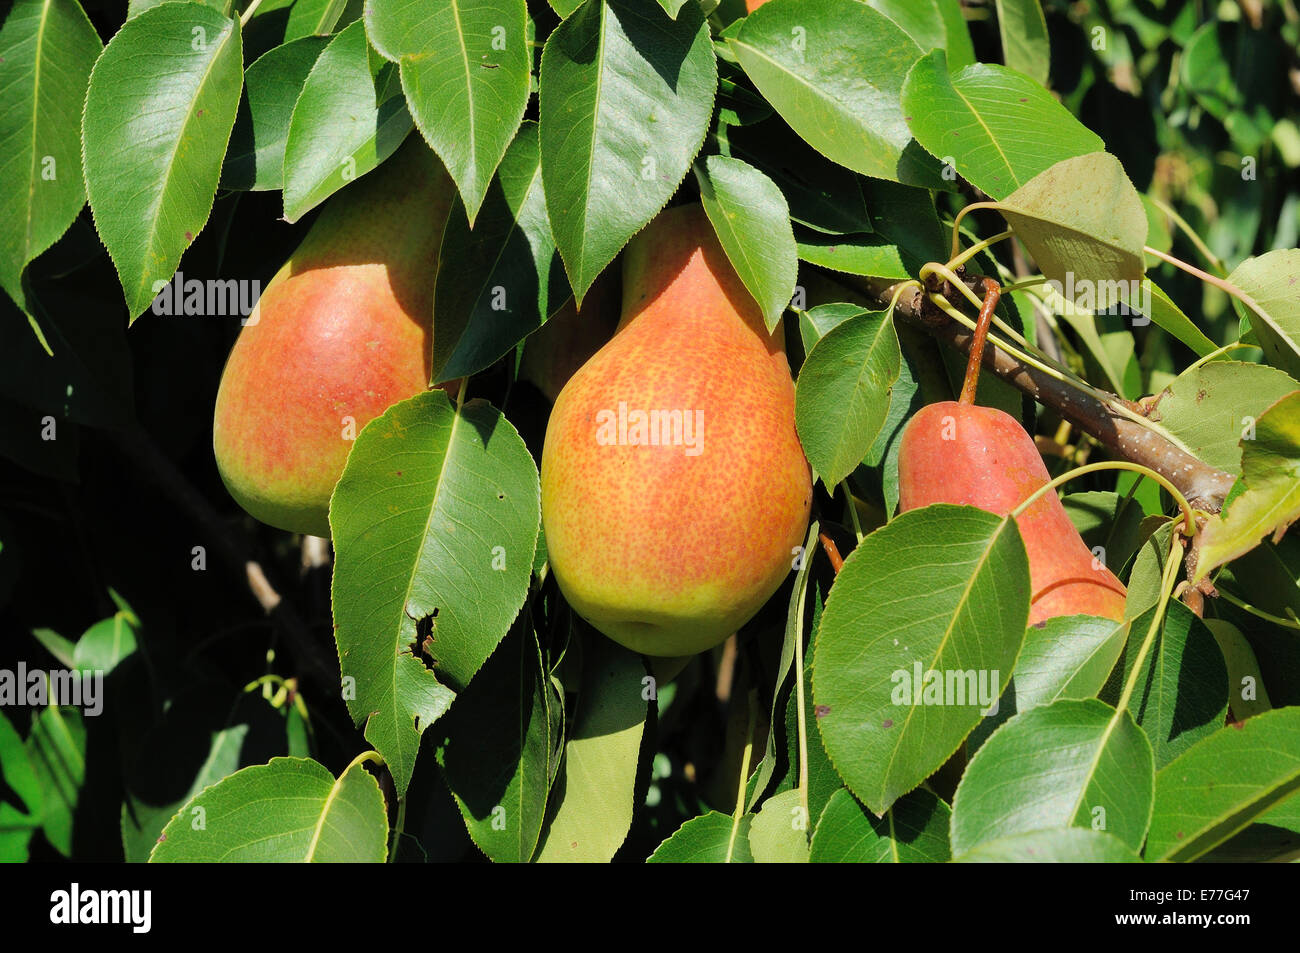 Three red side pears on the tree Stock Photo